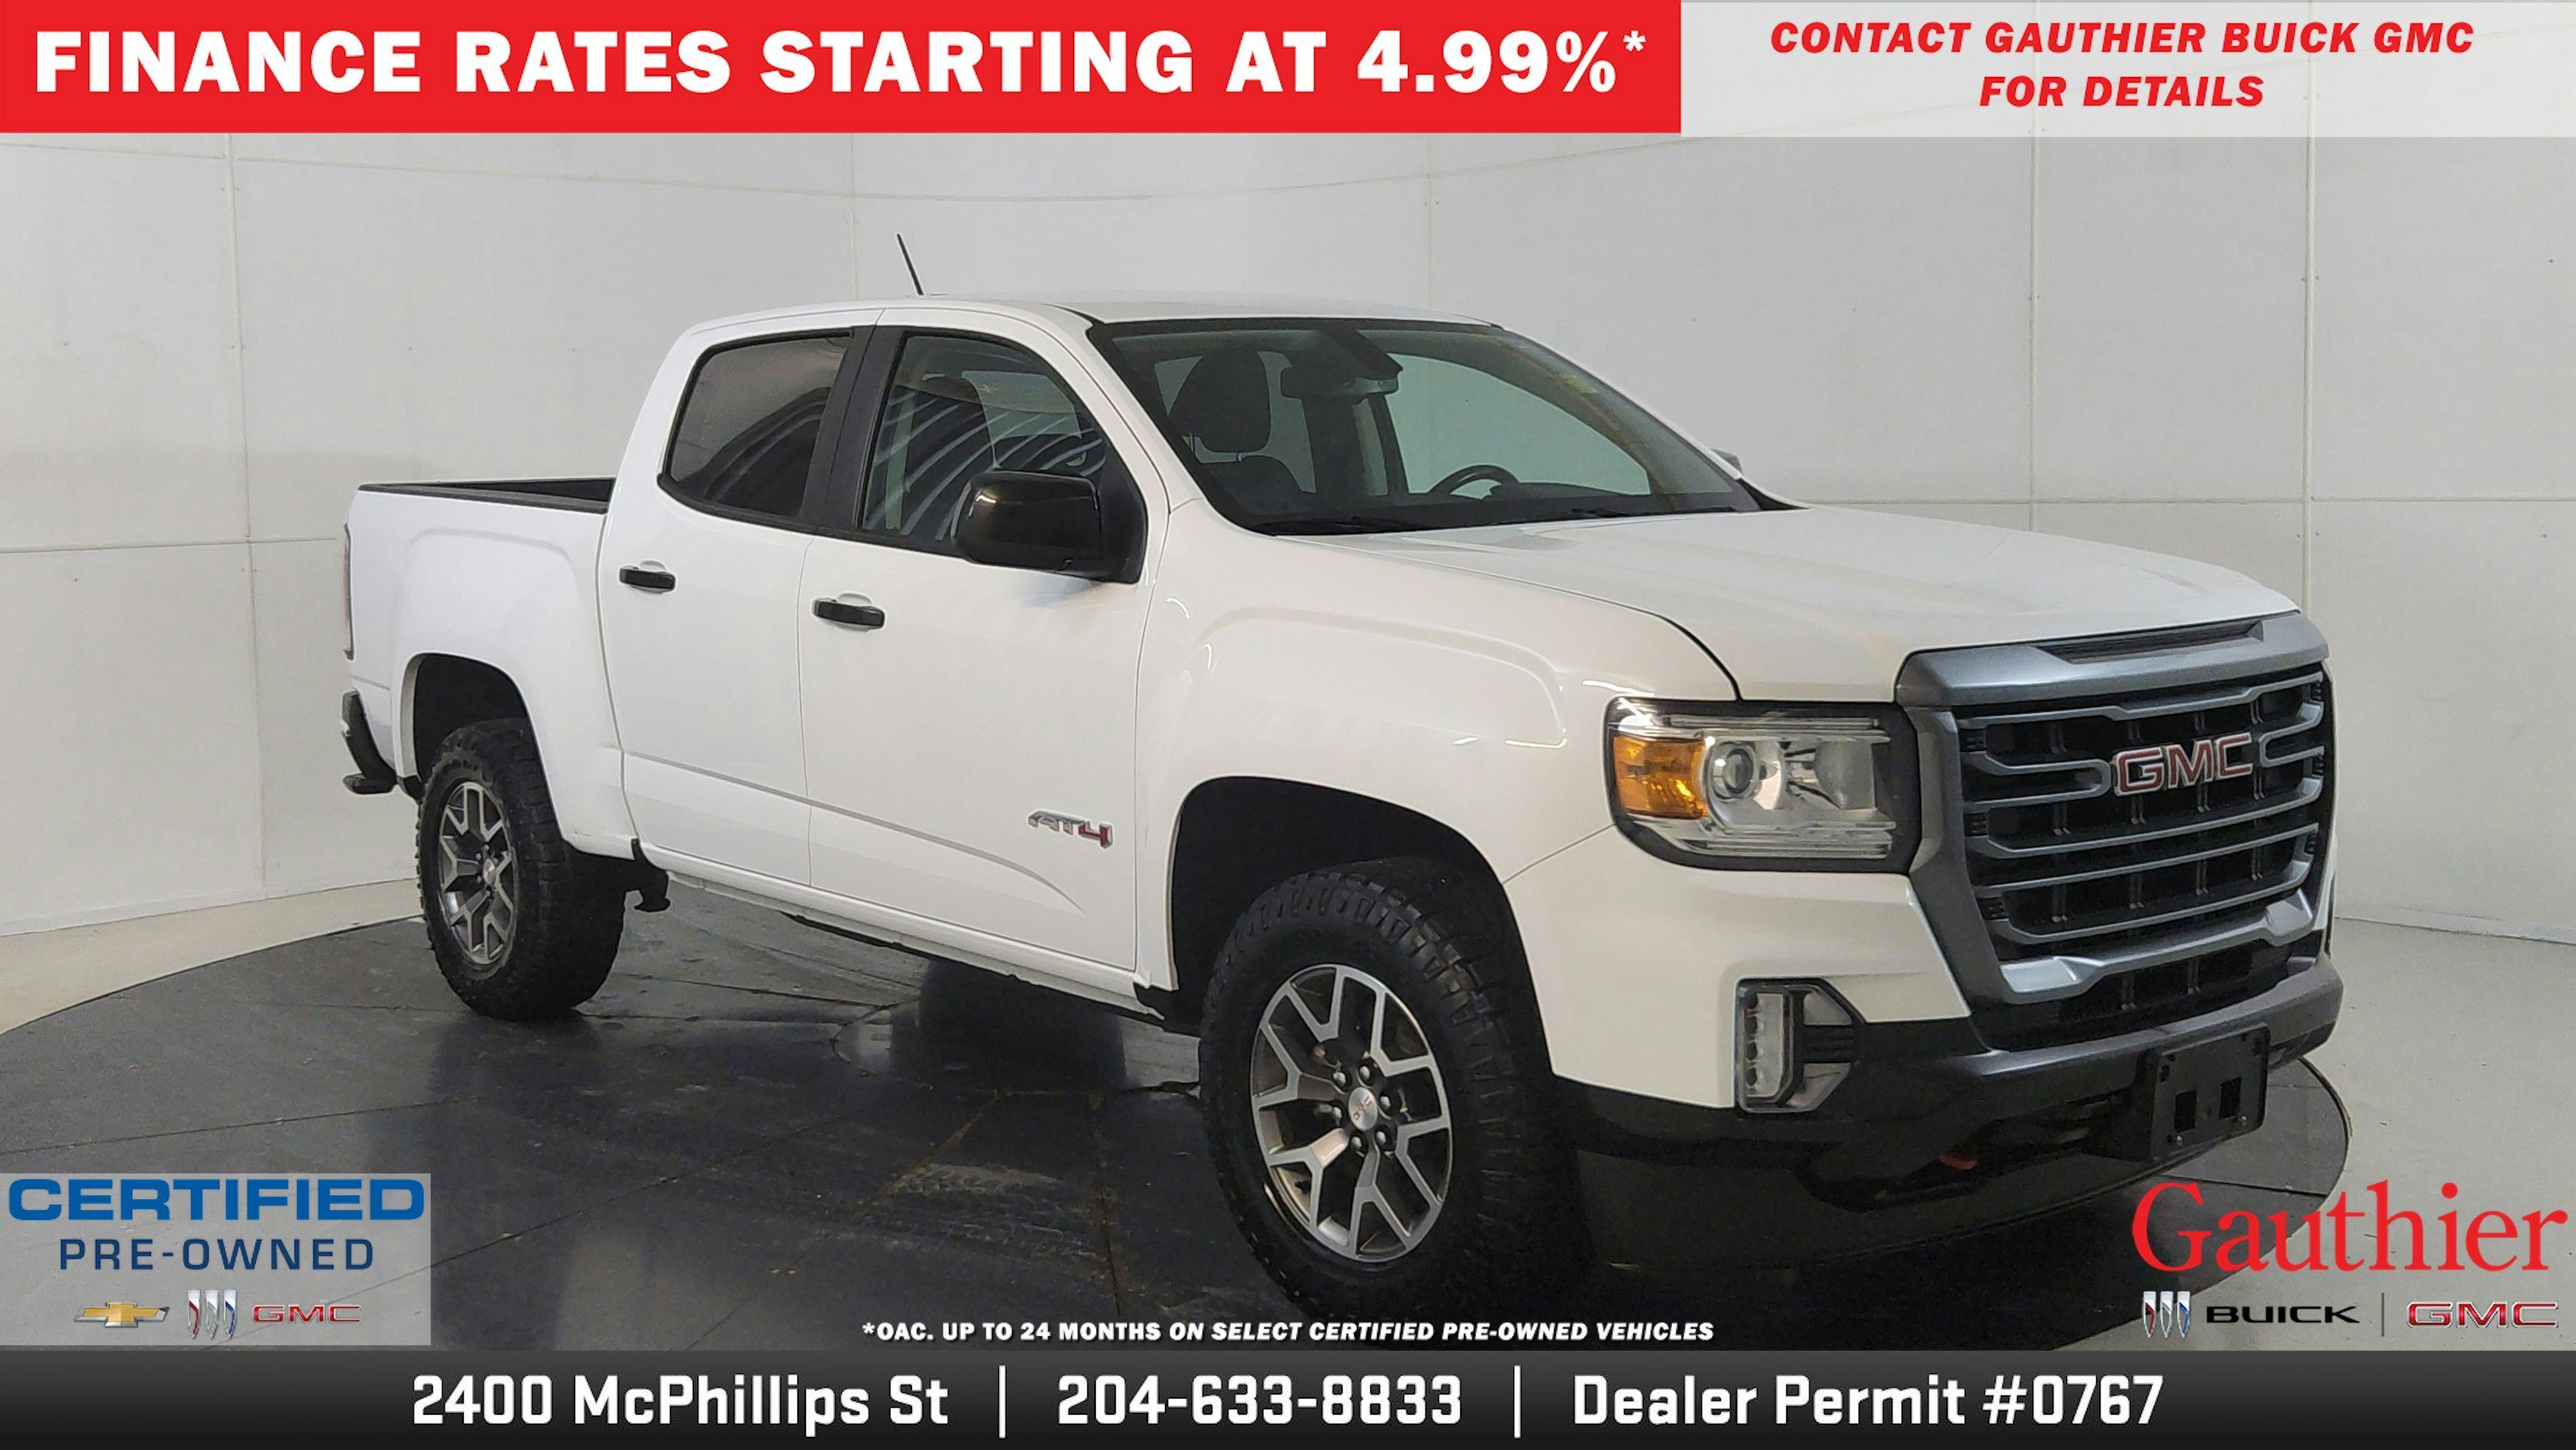 2021 GMC Canyon 4WD AT4, 3.6L V6, Heated Seats, Remote Start, Towi